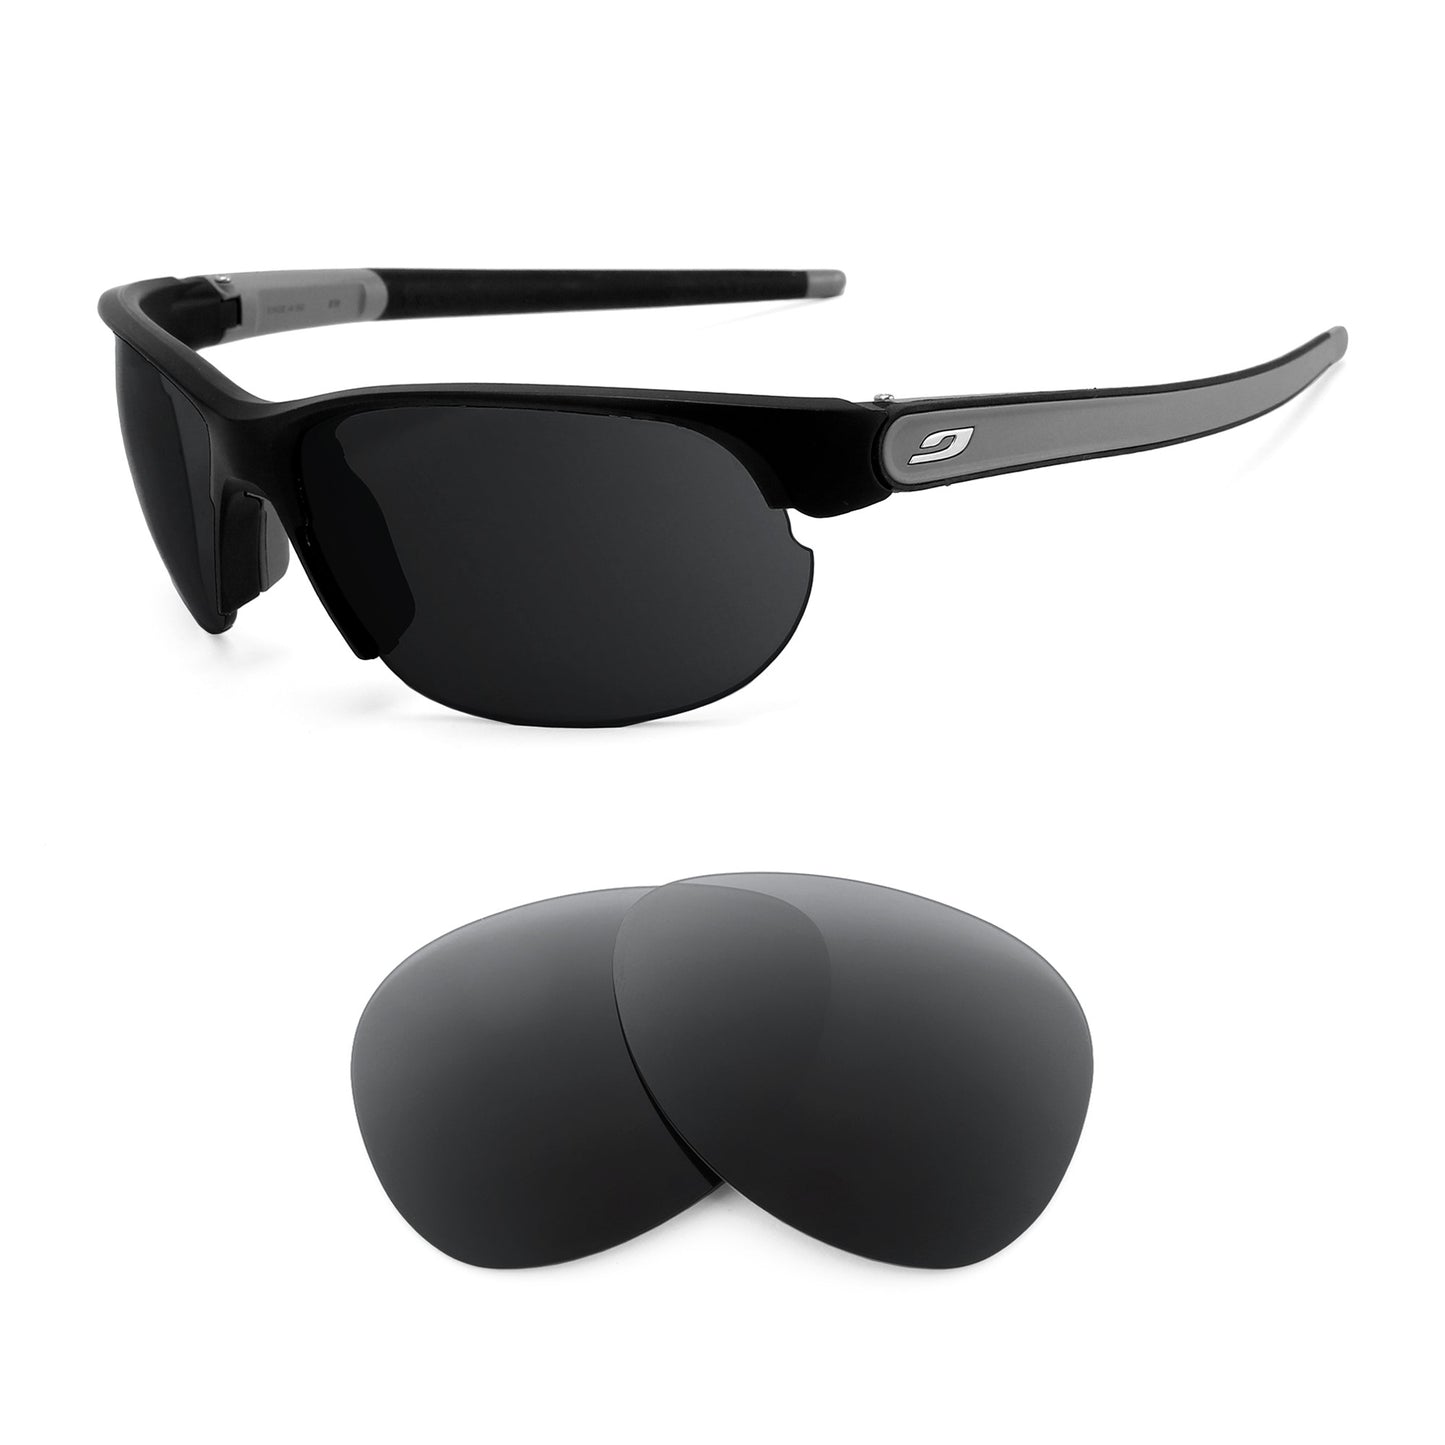 Julbo Breeze sunglasses with replacement lenses